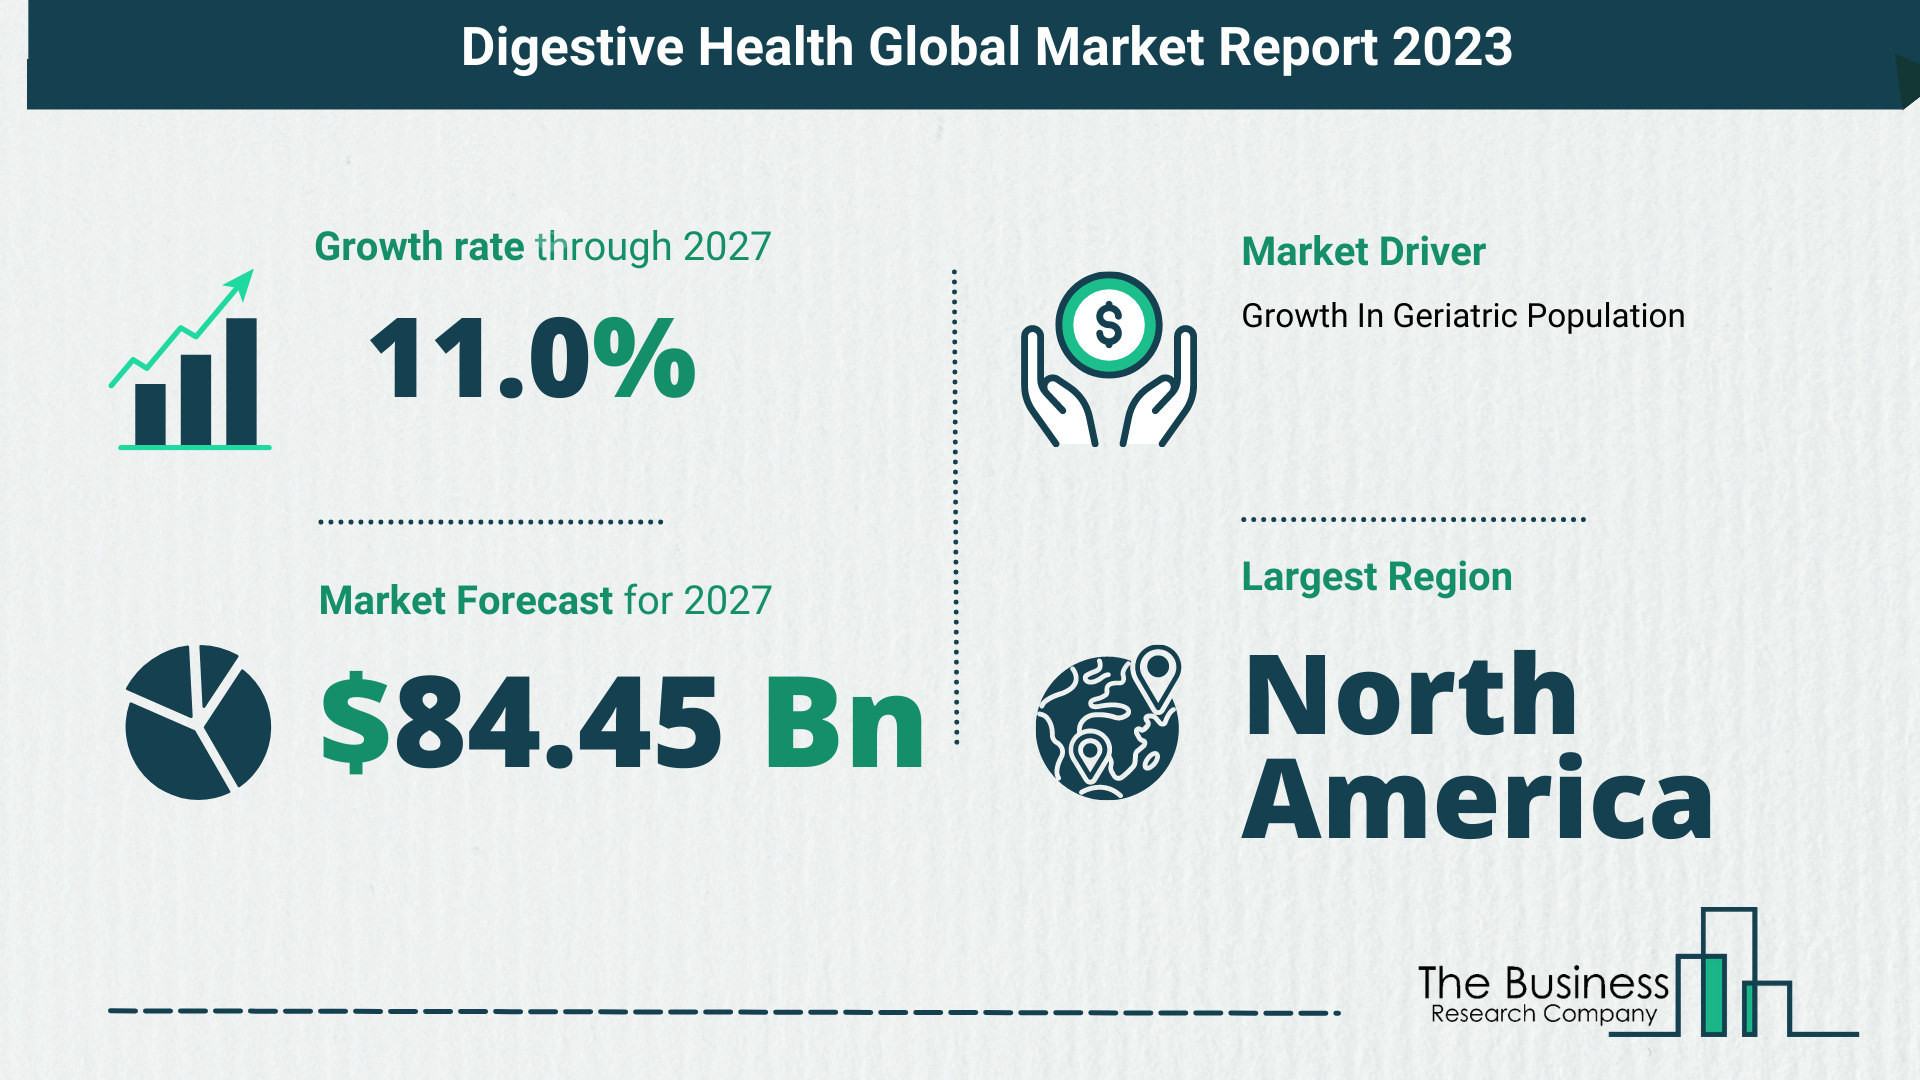 Top 5 Insights From The Digestive Health Market Report 2023